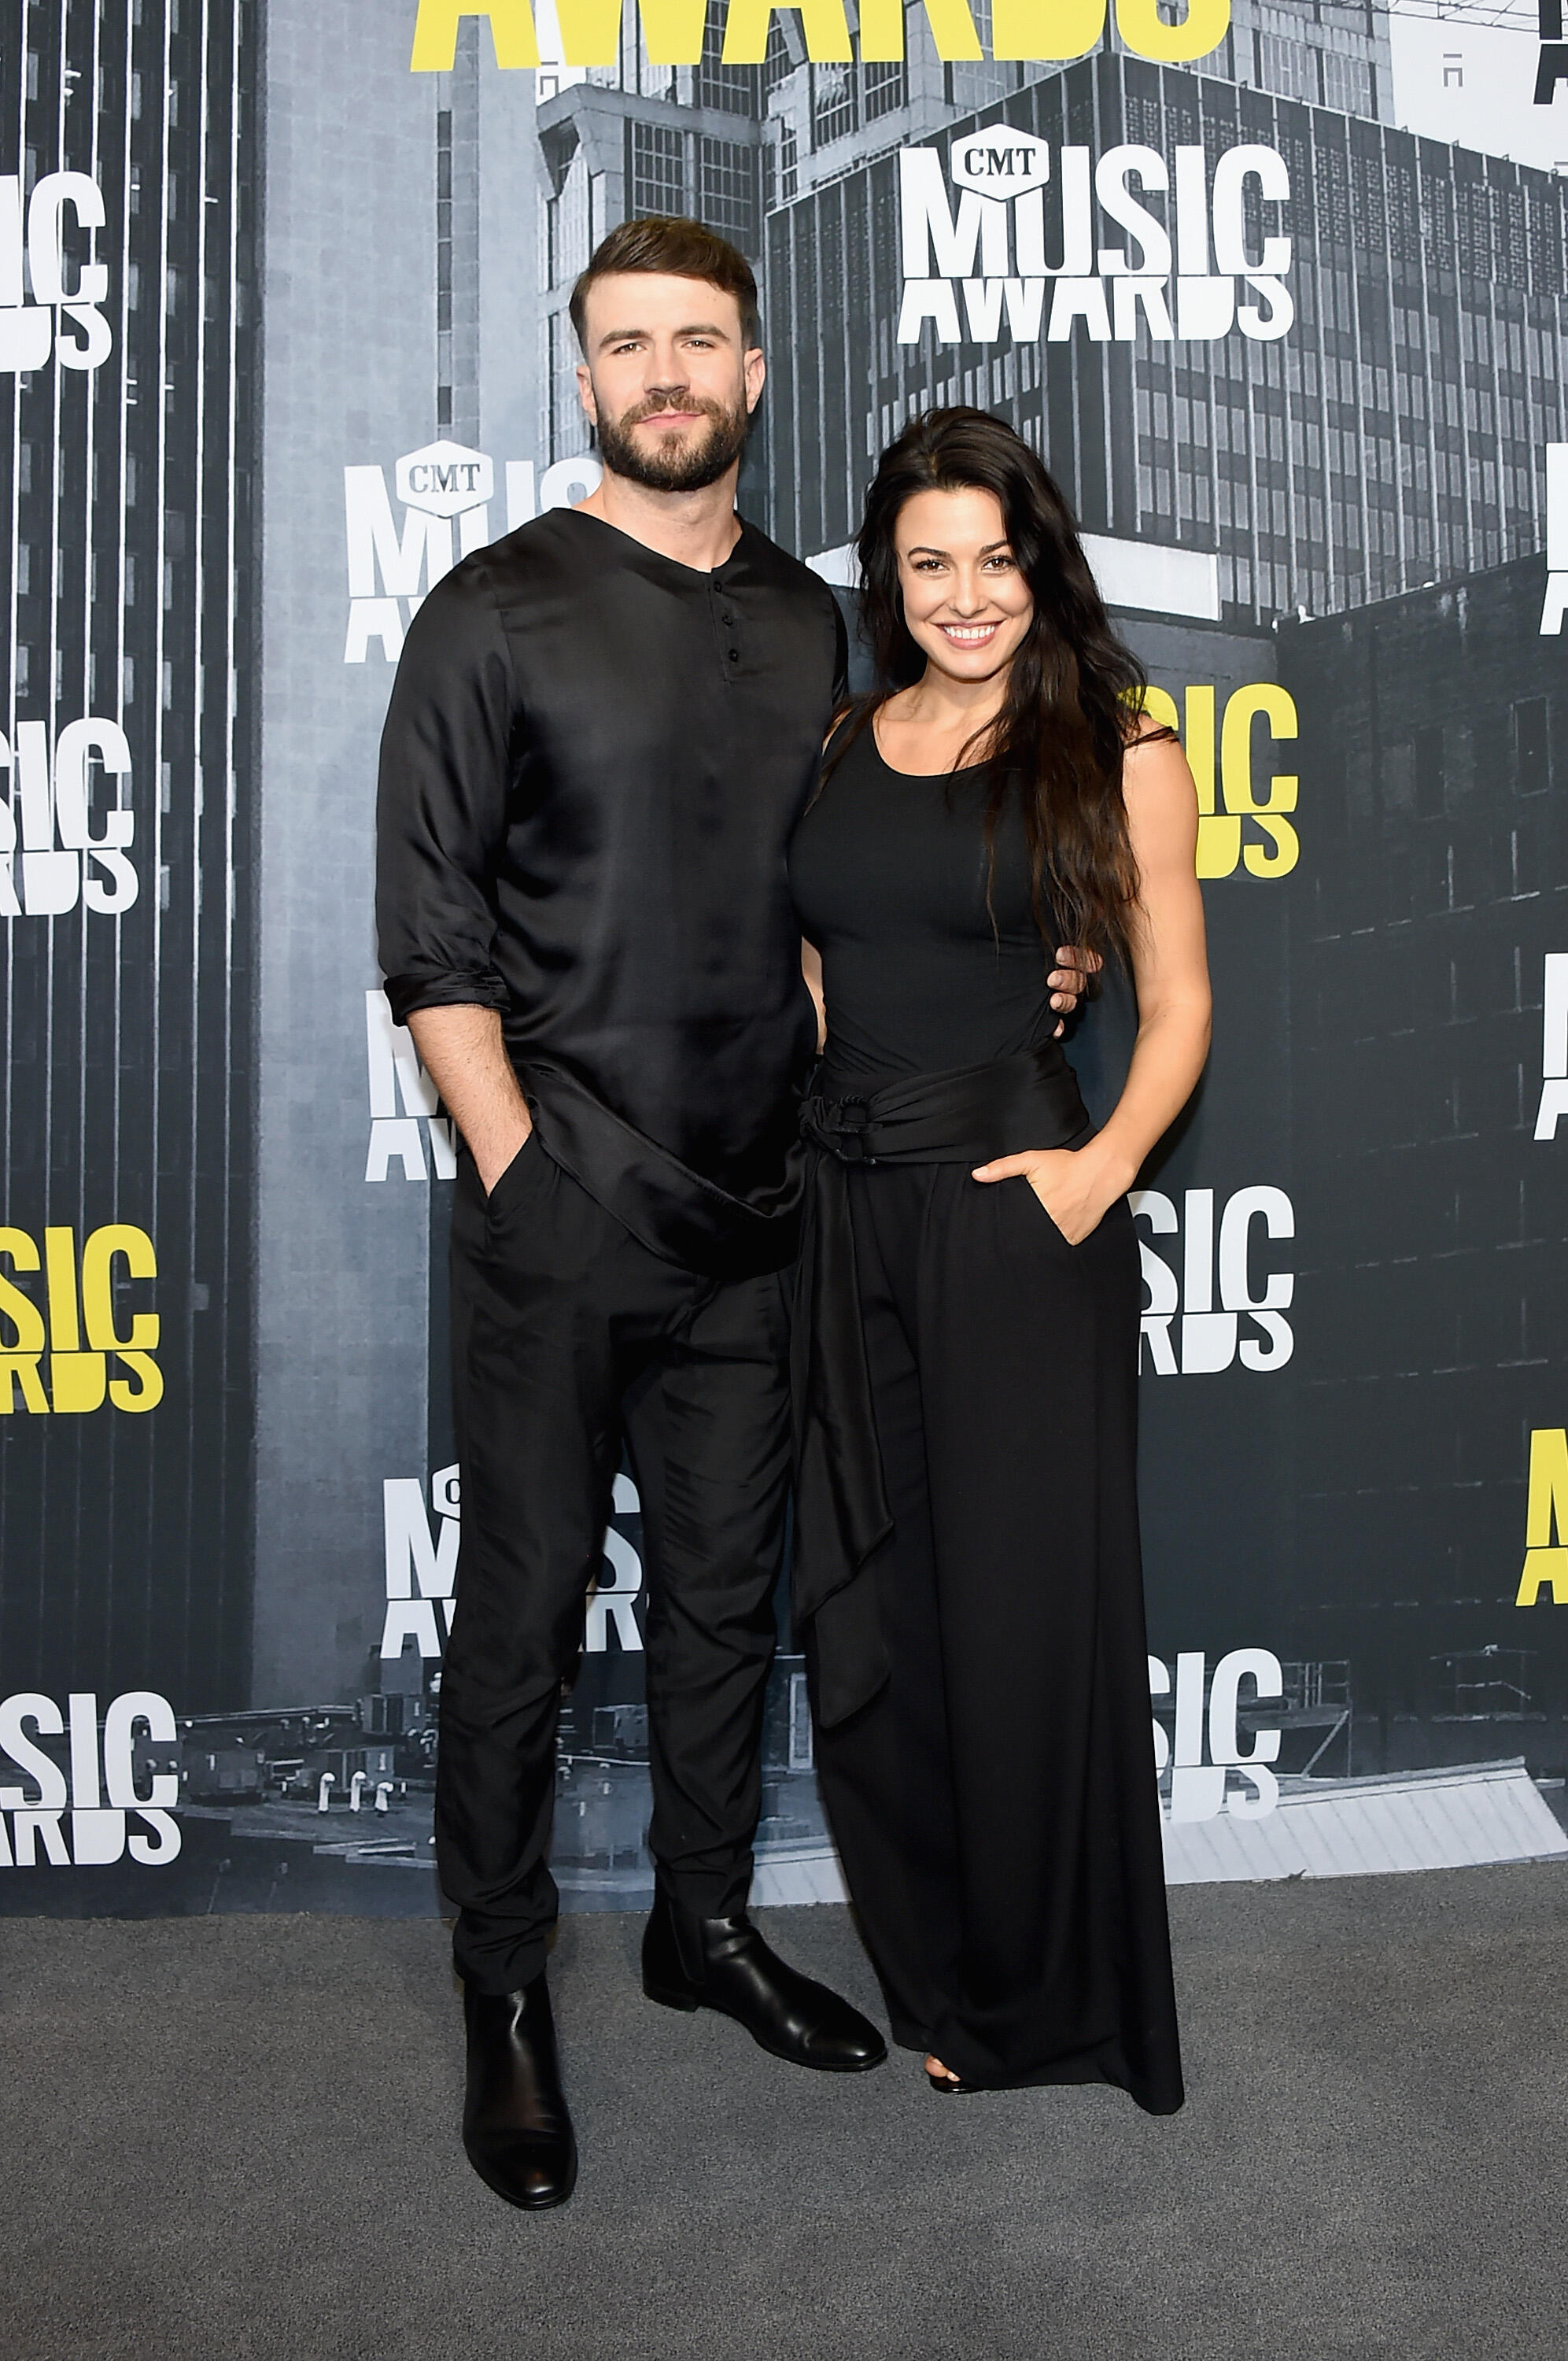 NASHVILLE, TN - JUNE 07:  Singer-songwriter Sam Hunt and Hannah Lee Fowler attend the 2017 CMT Music awards at the Music City Center on June 7, 2017 in Nashville, Tennessee.  (Photo by Michael Loccisano/Getty Images For CMT)